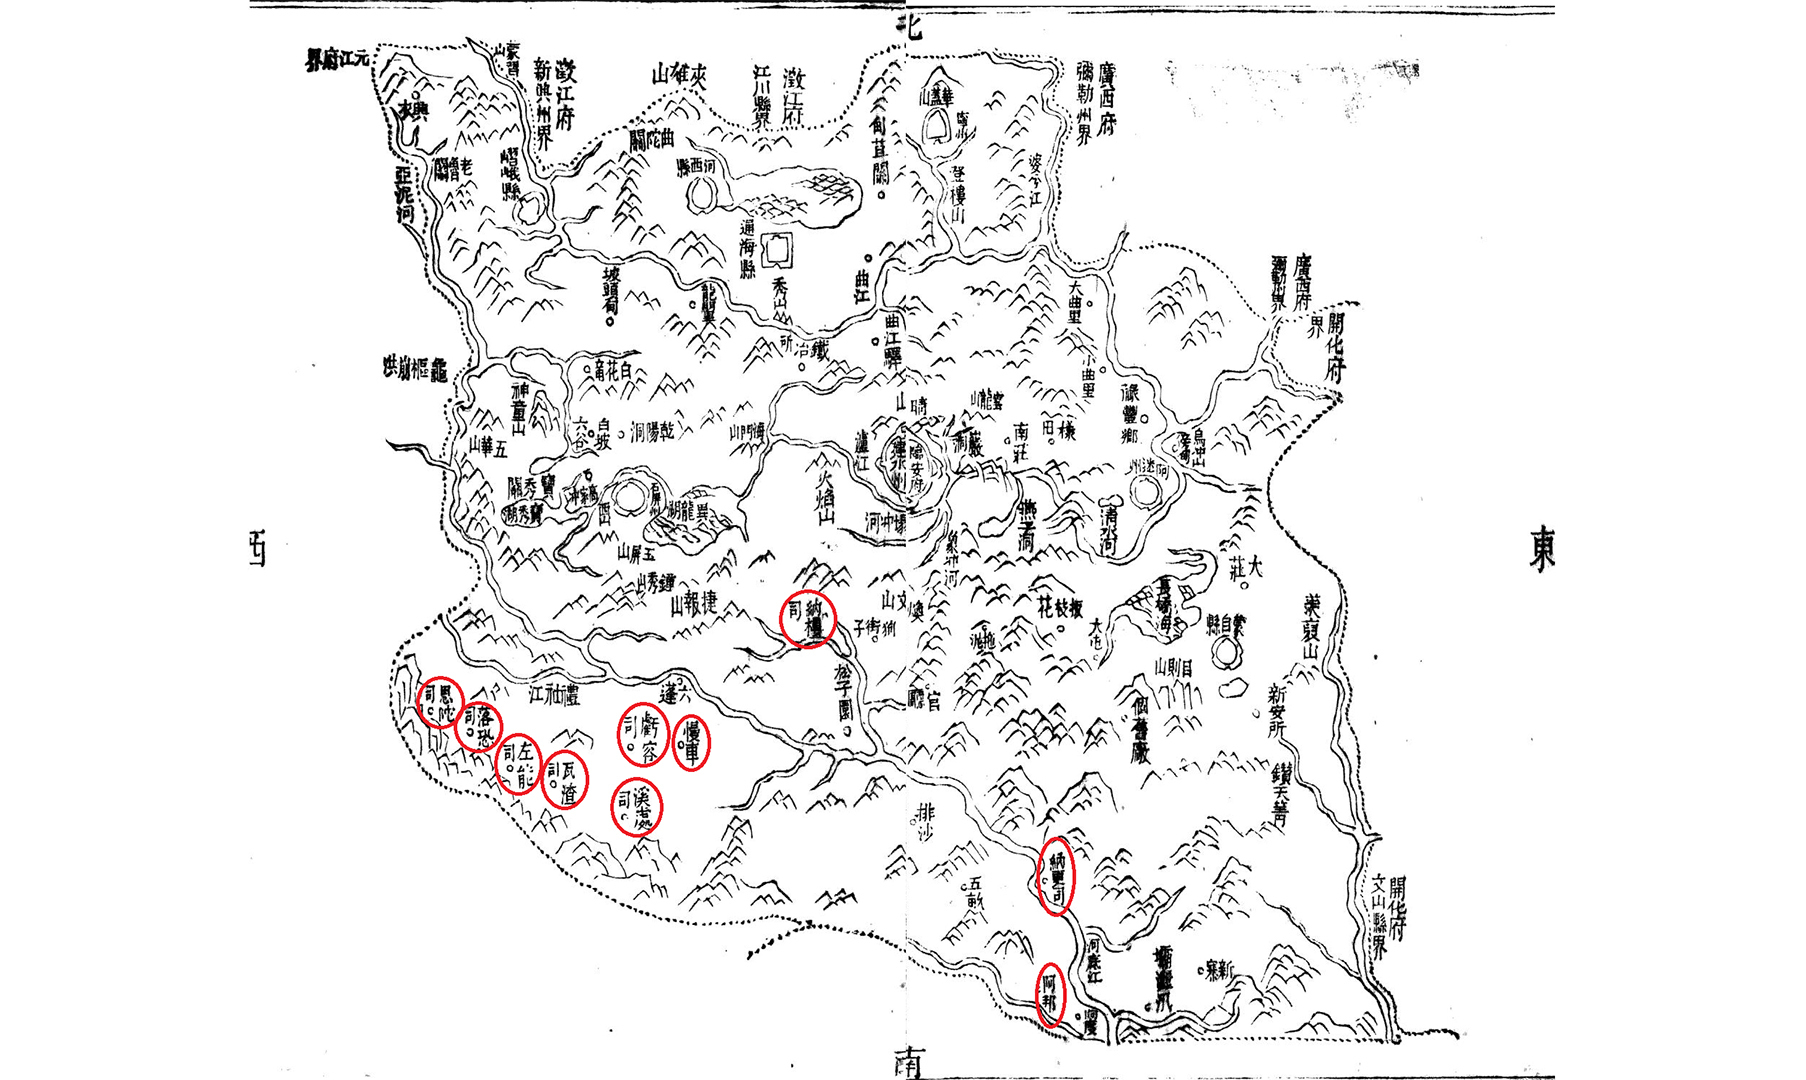 The map of Linan Prefecture copy